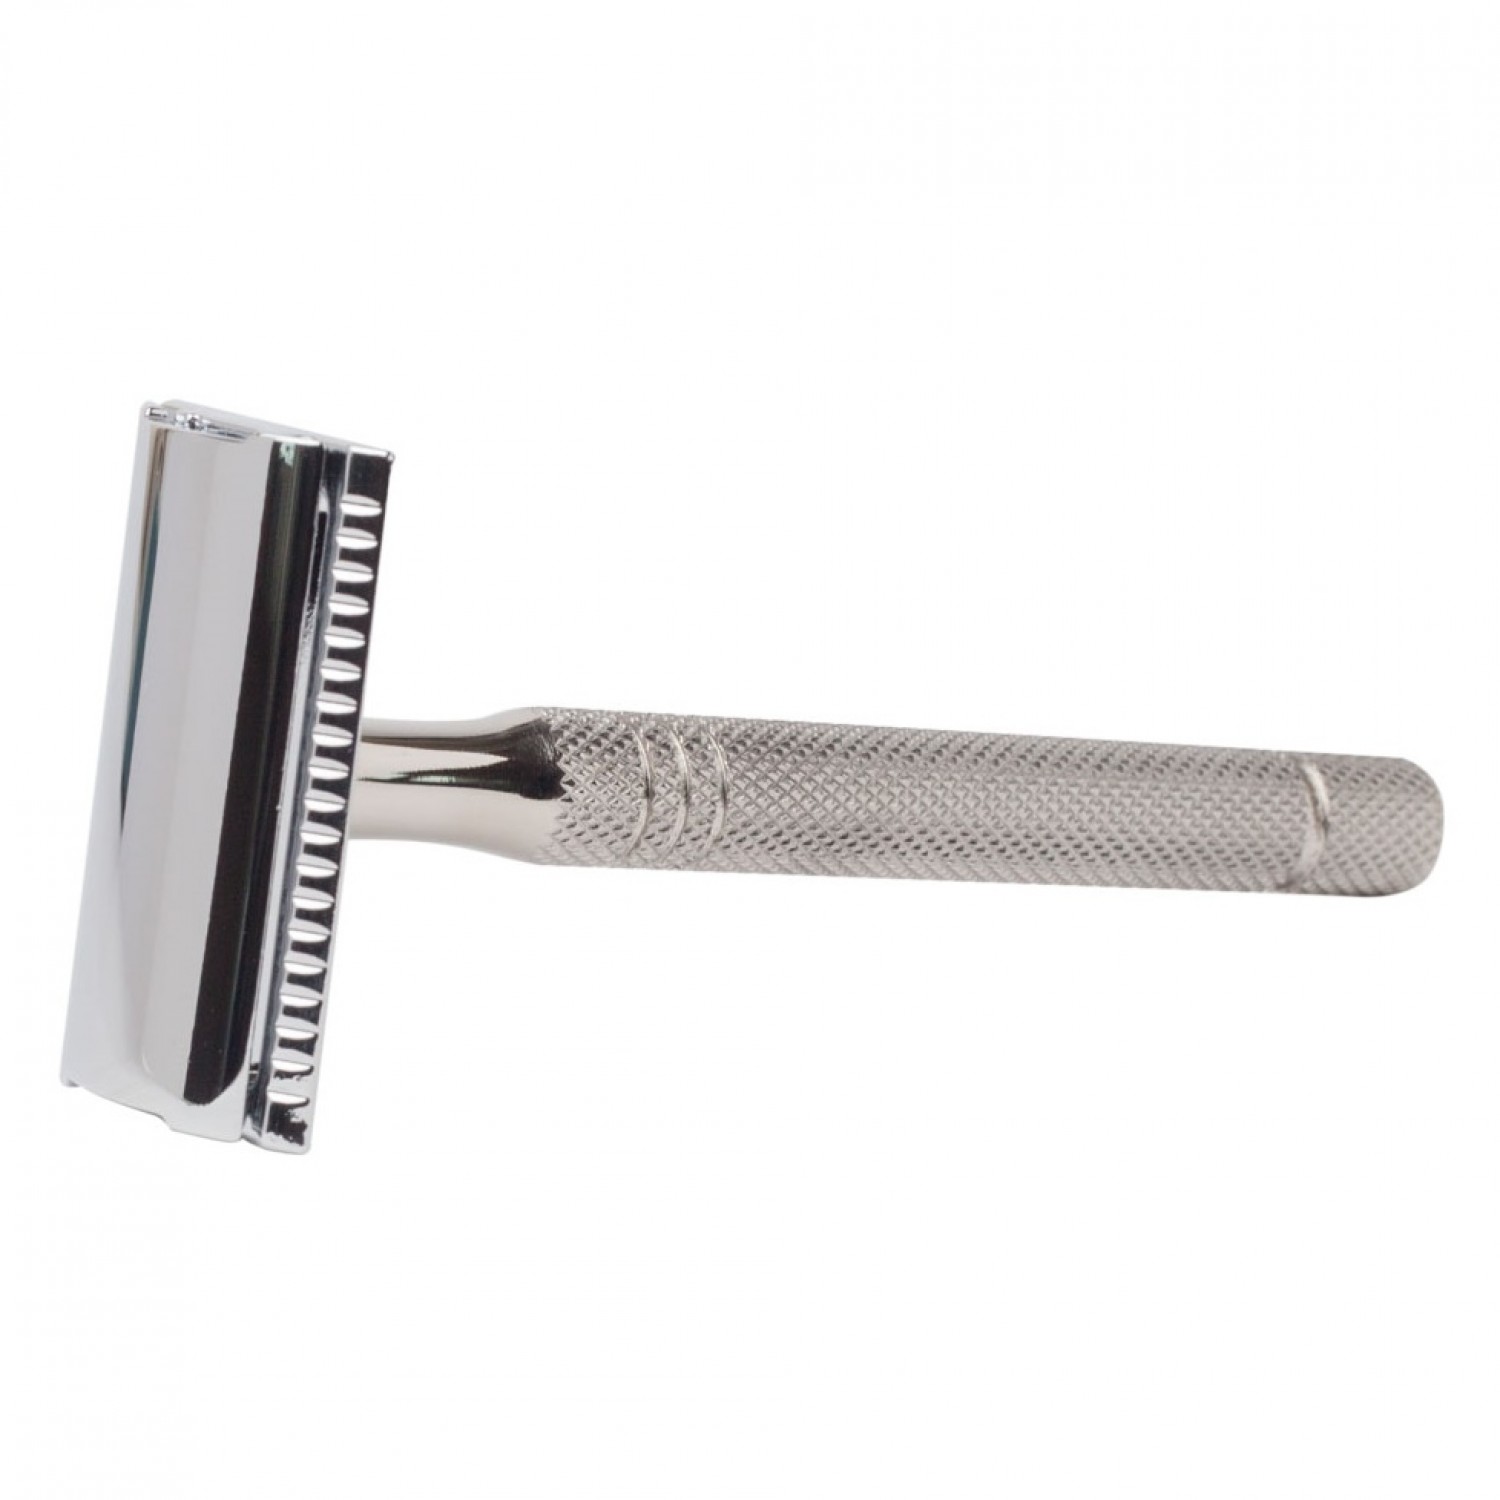 Gentle Shaver safety razor stainless steel handle long | G&F